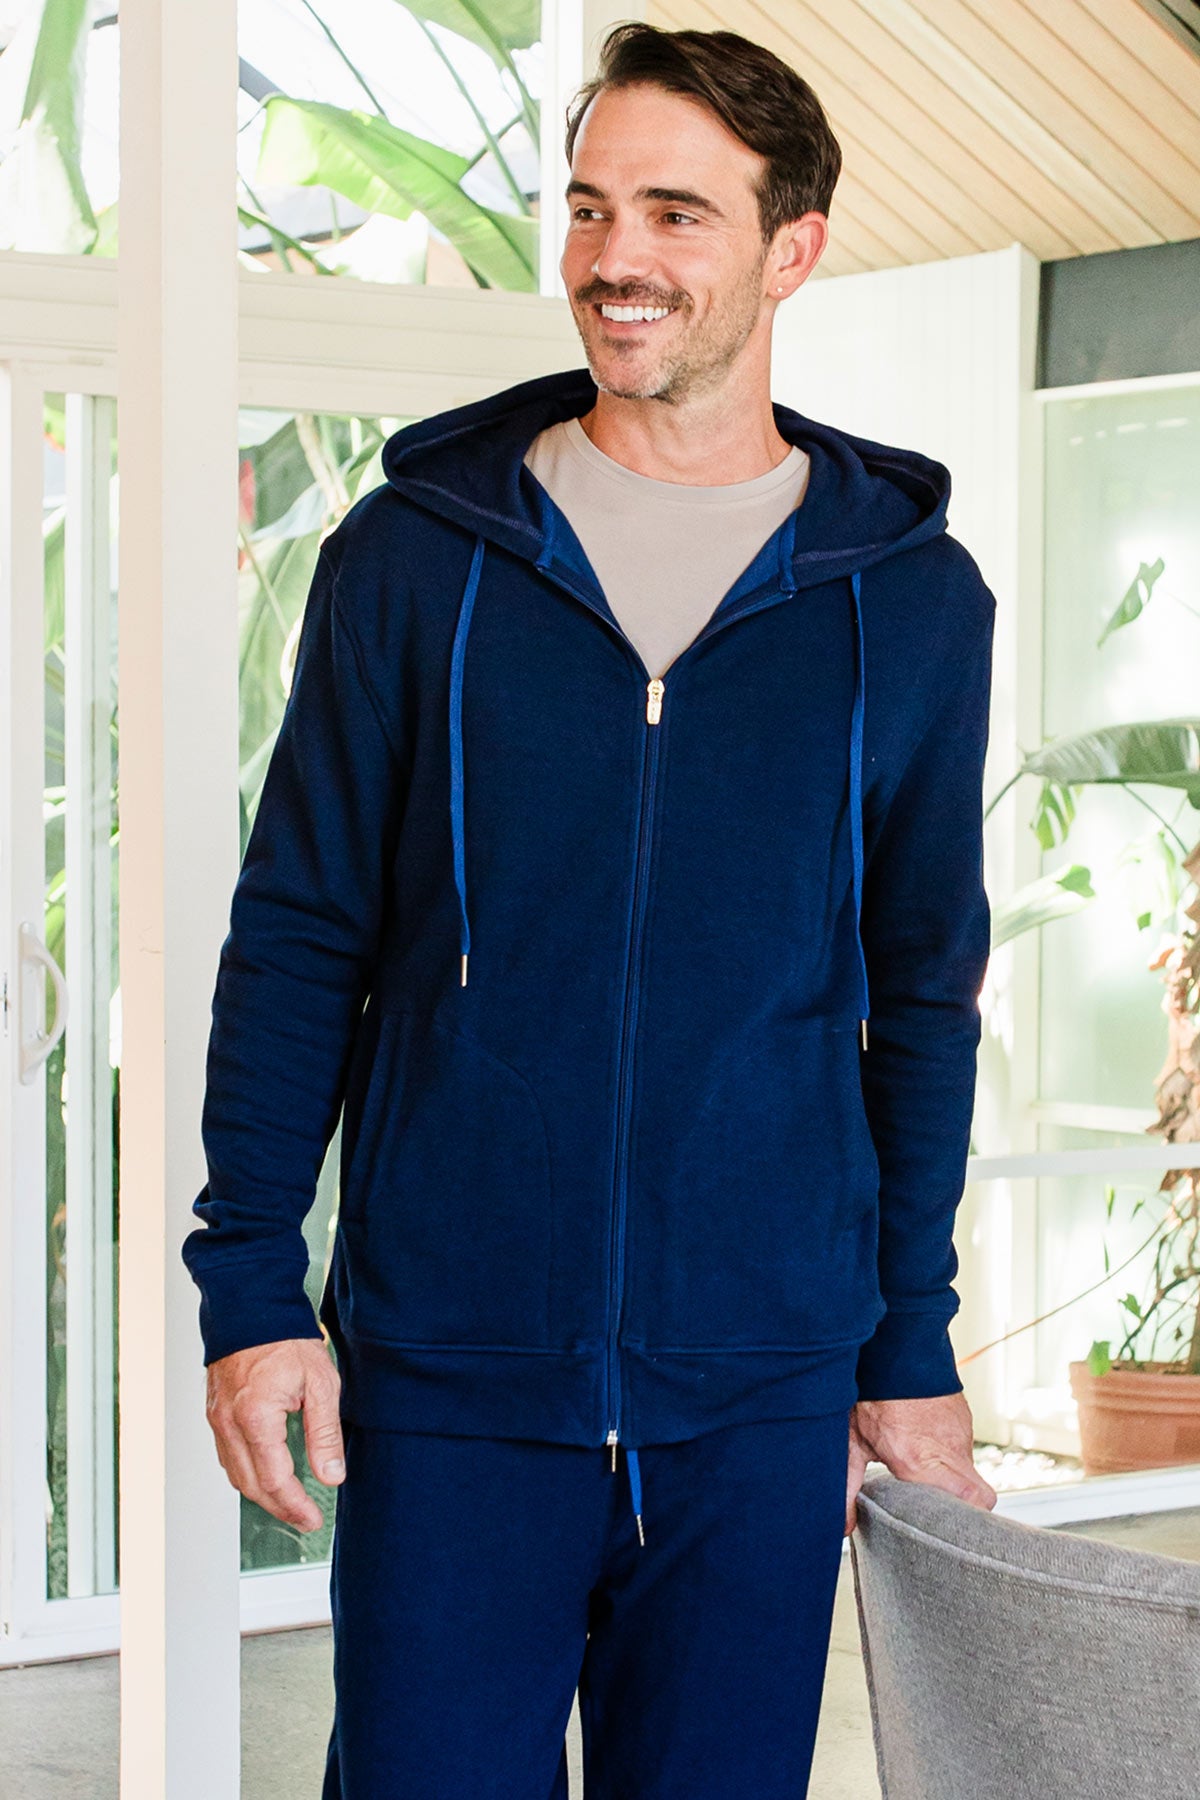 A man standing and smiling off to the side with one hand hodling on to the back of a chair, wearing Yala Men's Joey Zip-Up Bamboo & Organic Cotton Sweatshirt Hooded Jacket in Navy